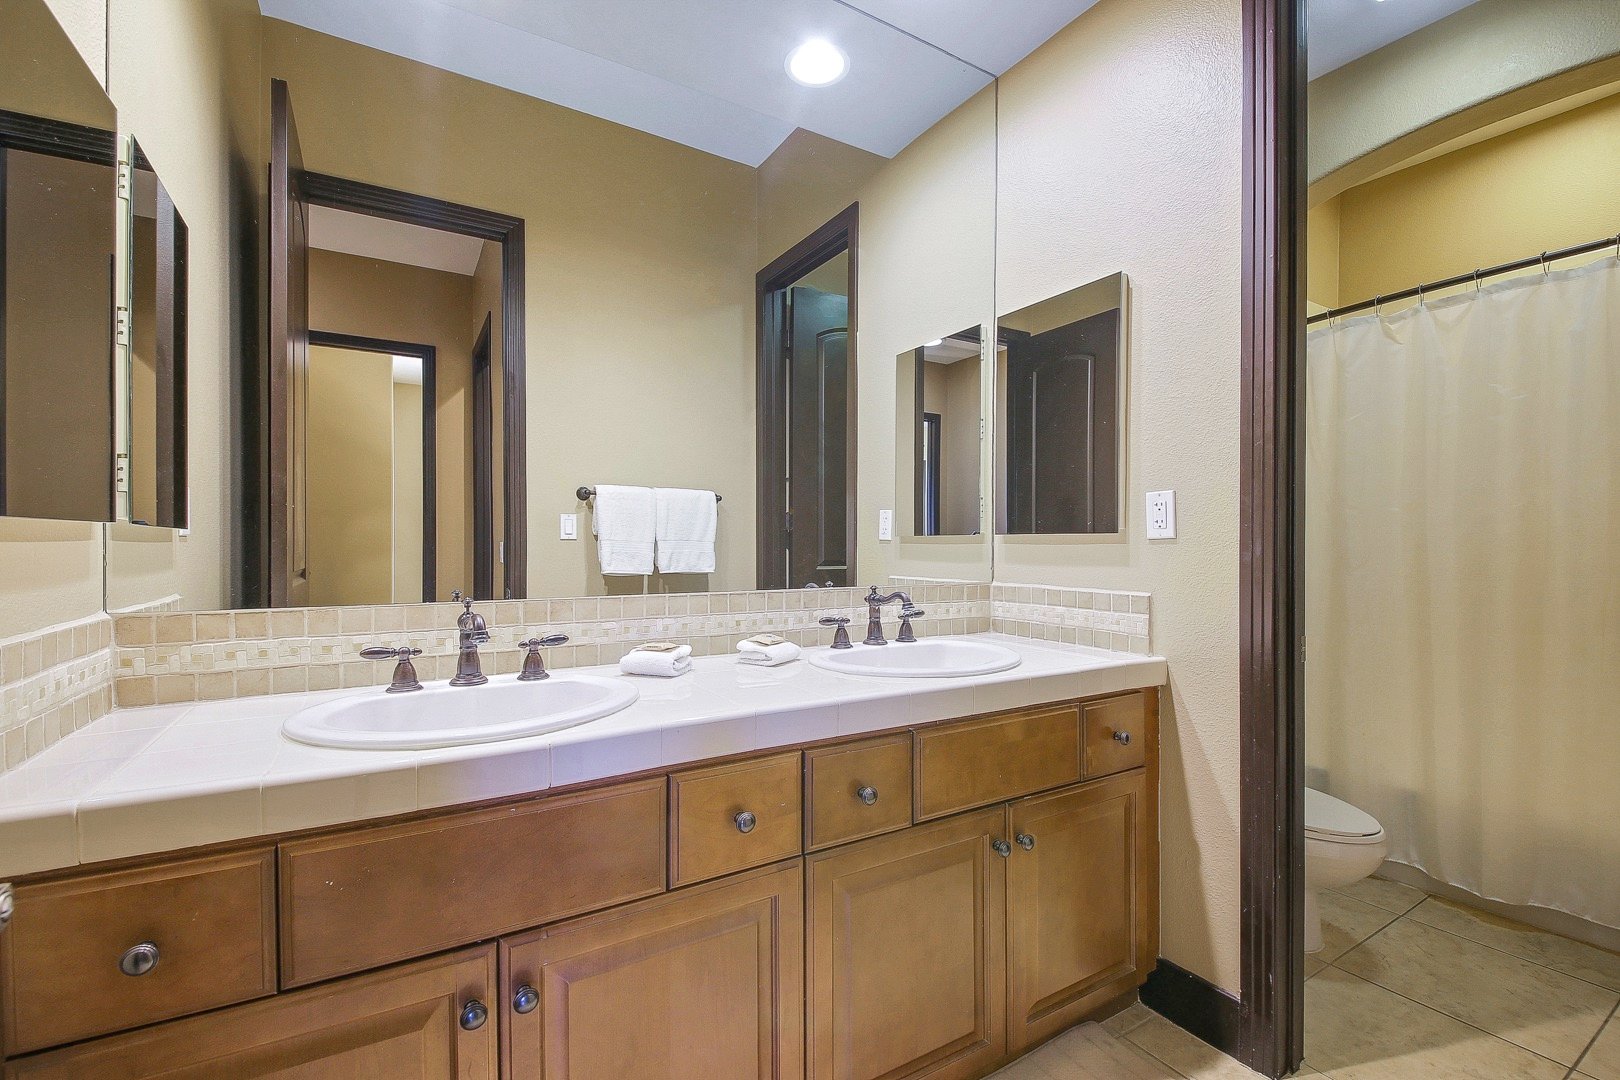 Bathroom 3 is located across bedroom 4 and features a shower, bathtub combo and double-vanity sinks. It may be used to service bedrooms 3 and 4.